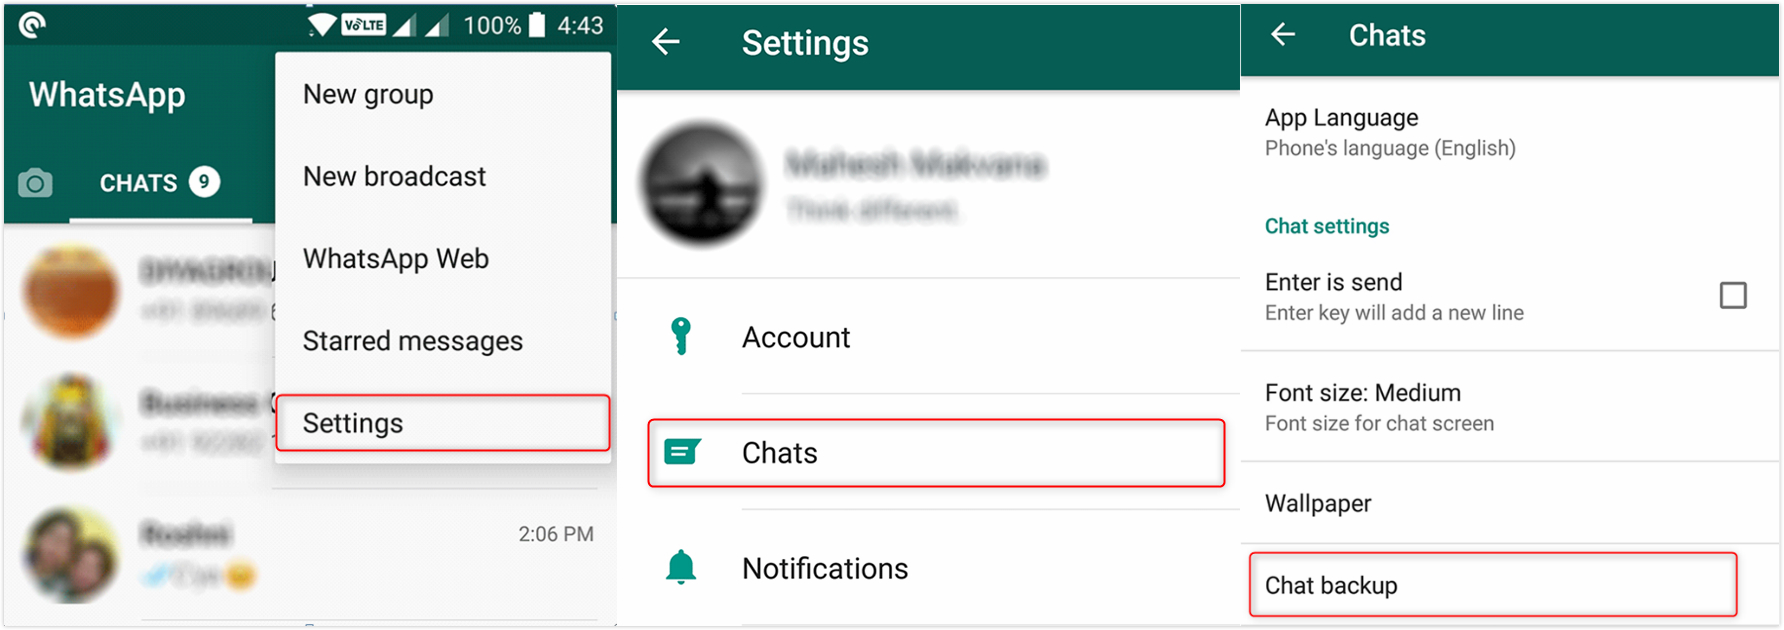 How To Restore Whatsapp Backup From Android To Iphone.